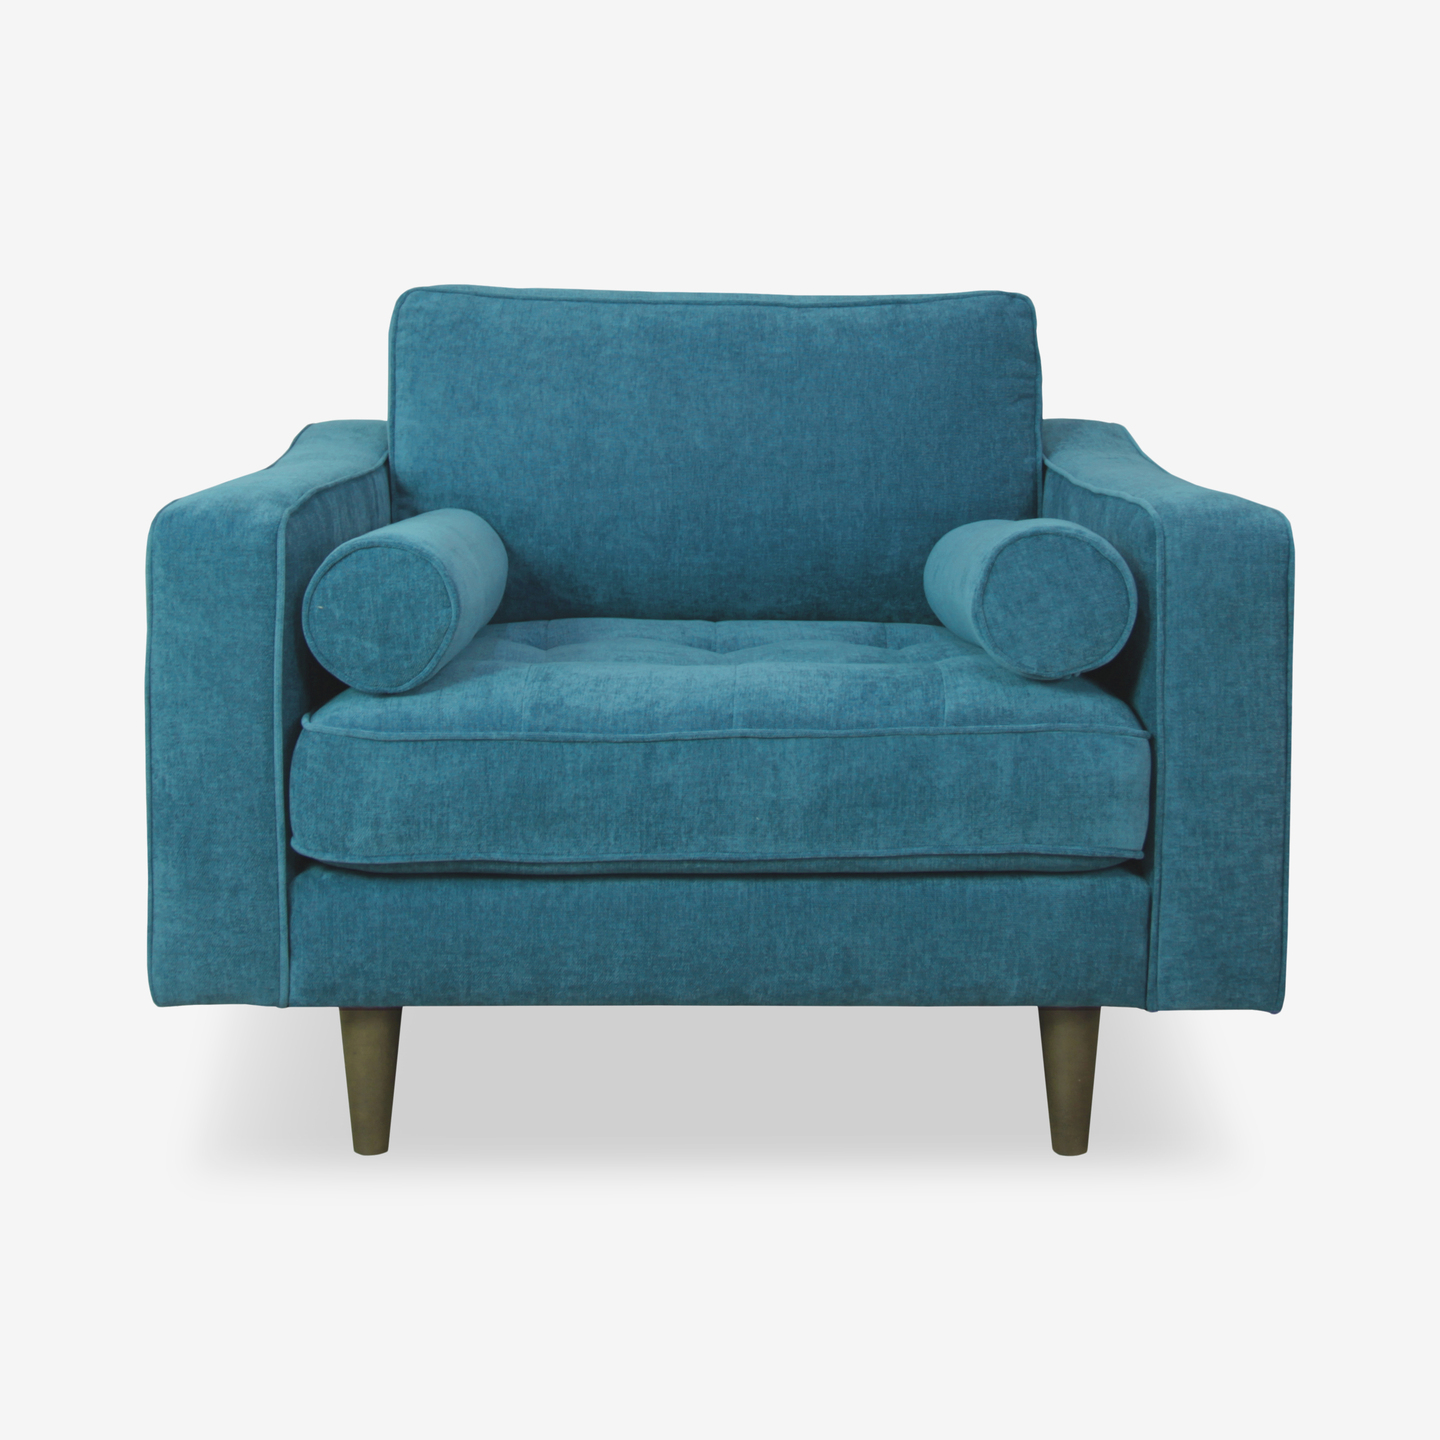 1185_Martell-Chair-Turquoise_front_2020